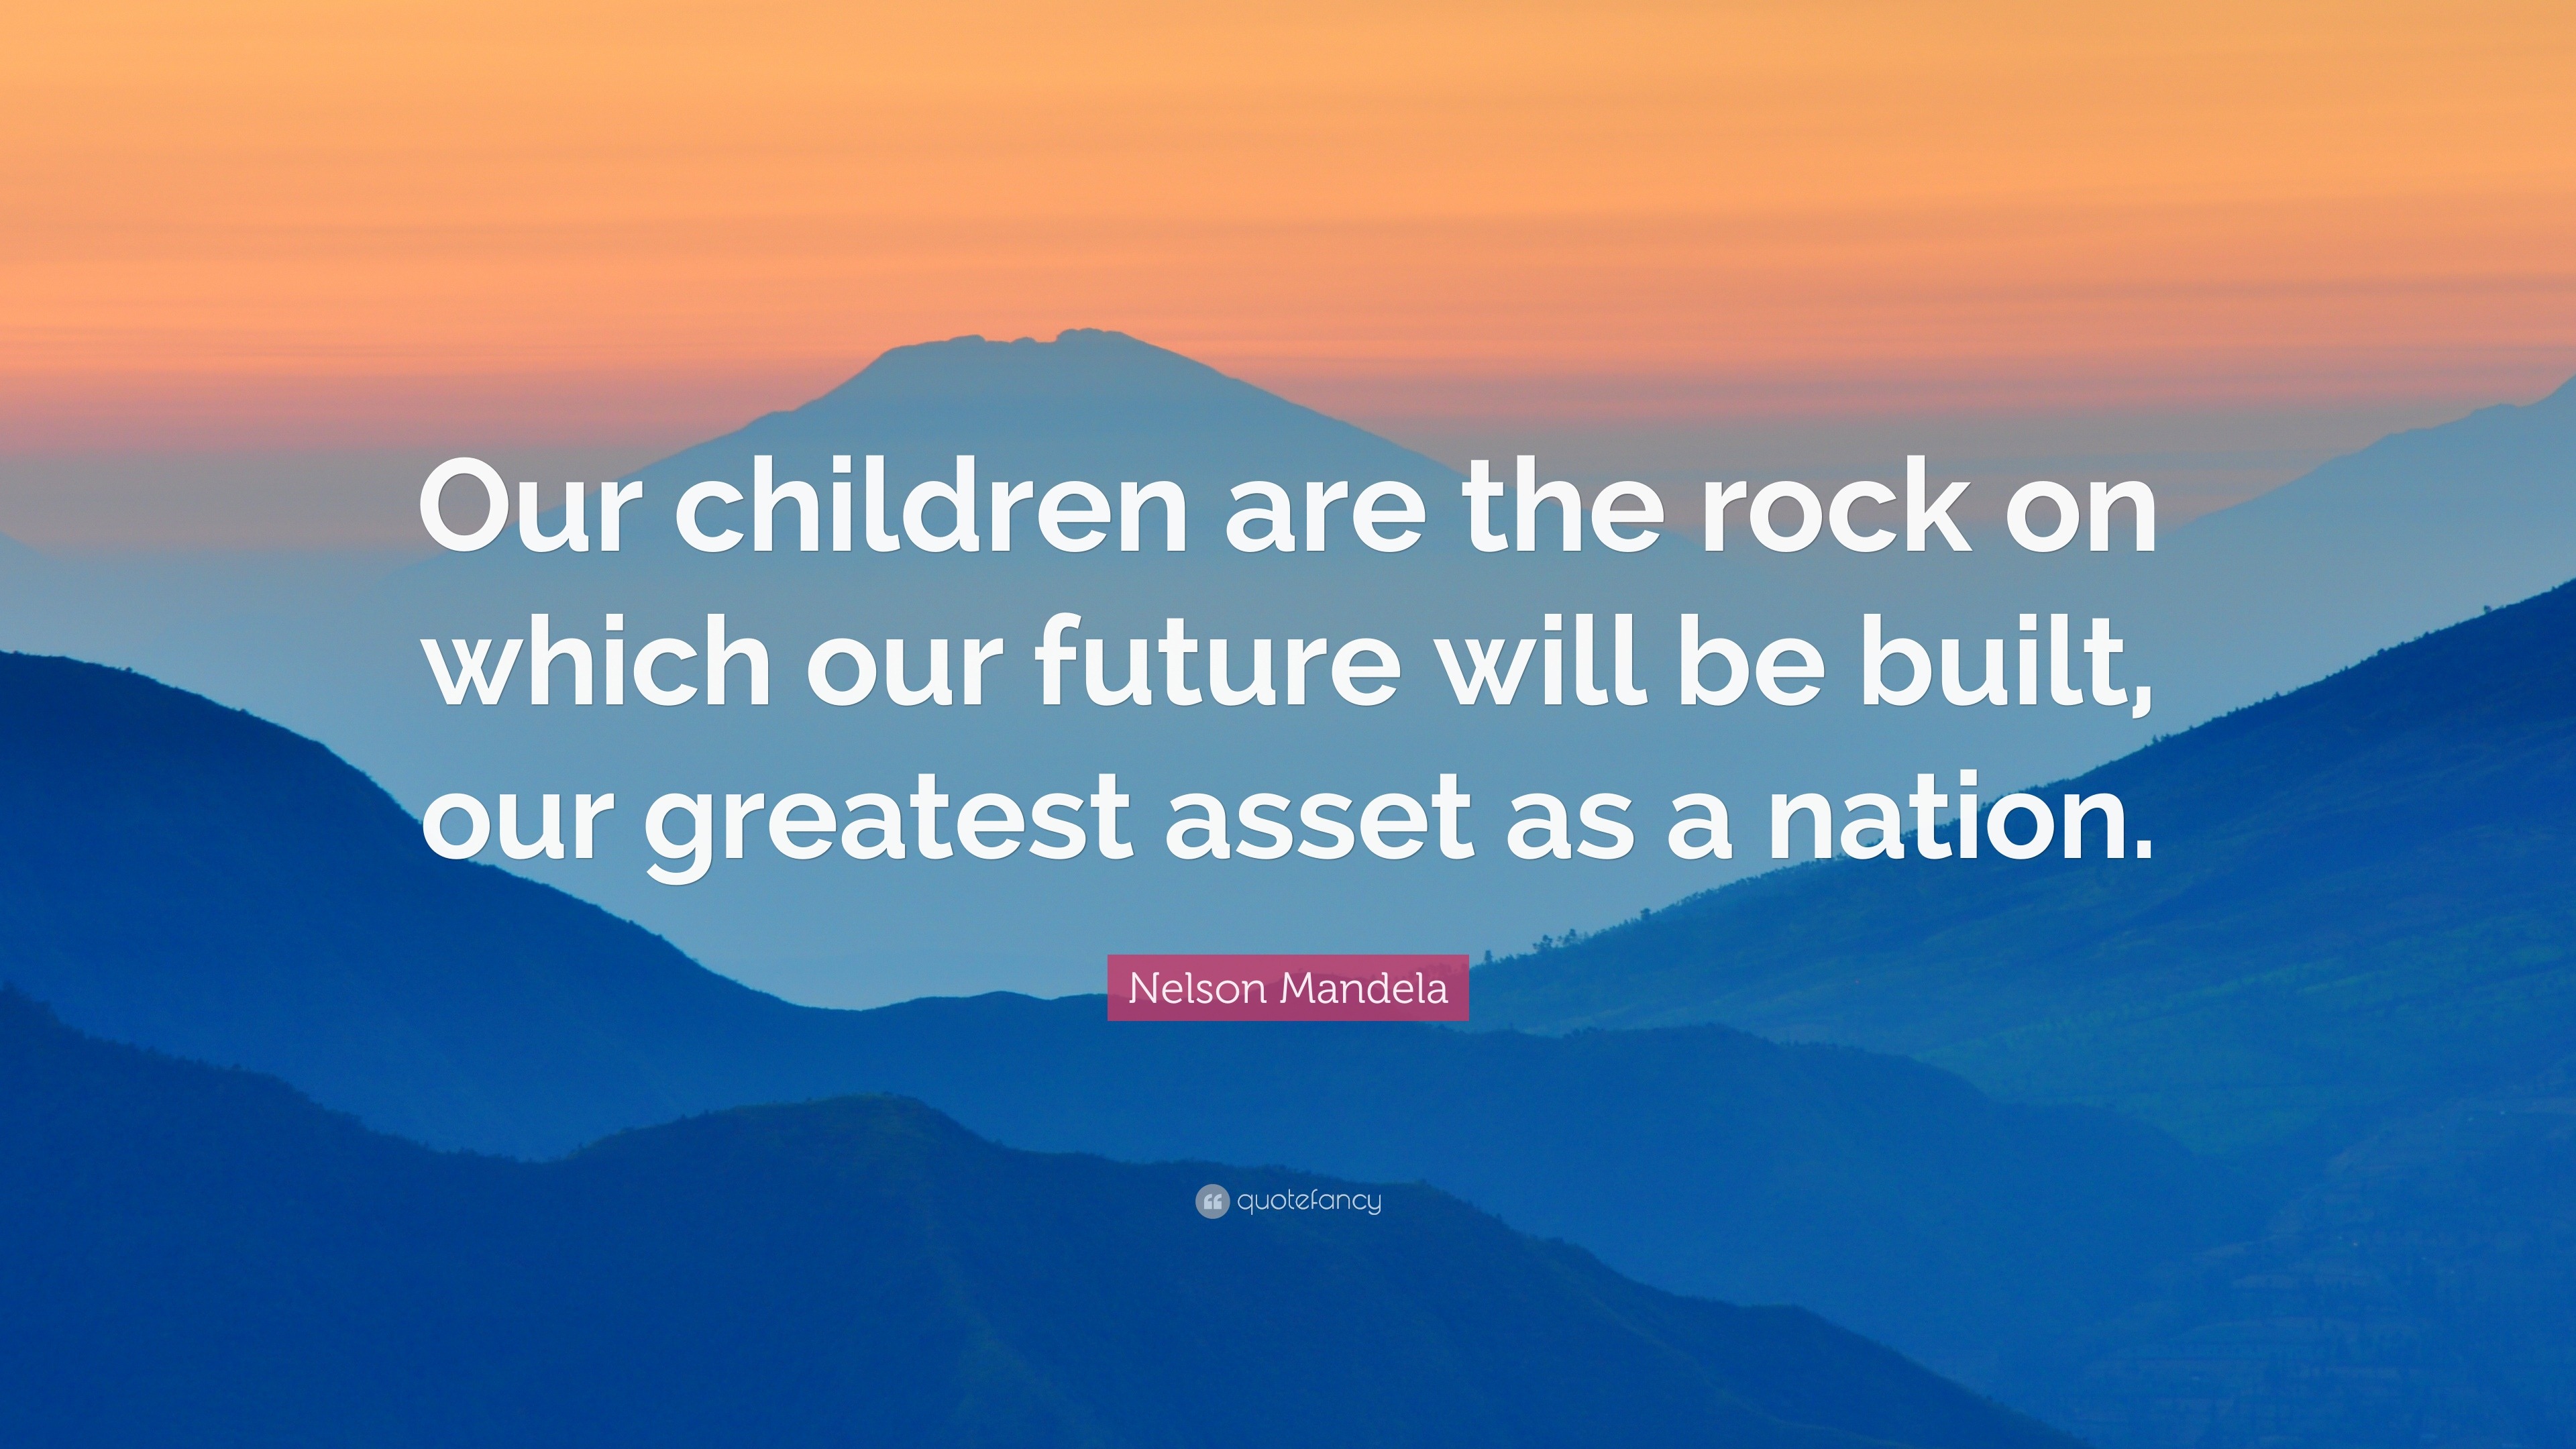 Students Are The Future Of Our Nation Quotes - Ilka Randie